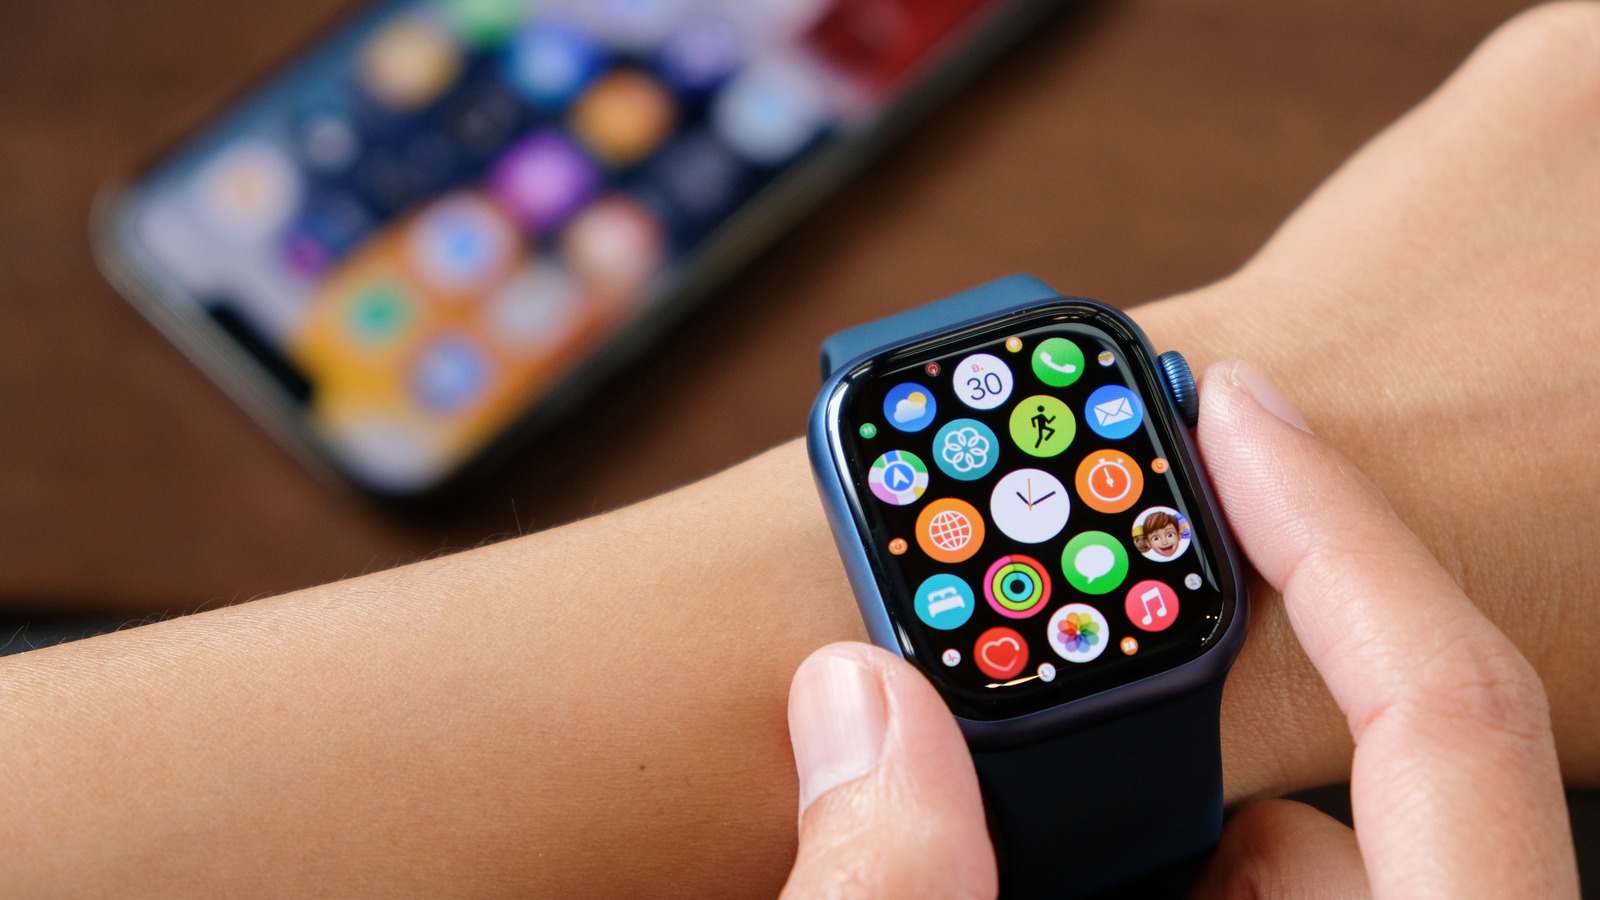 How To Unpair An Apple Watch From Your iPhone